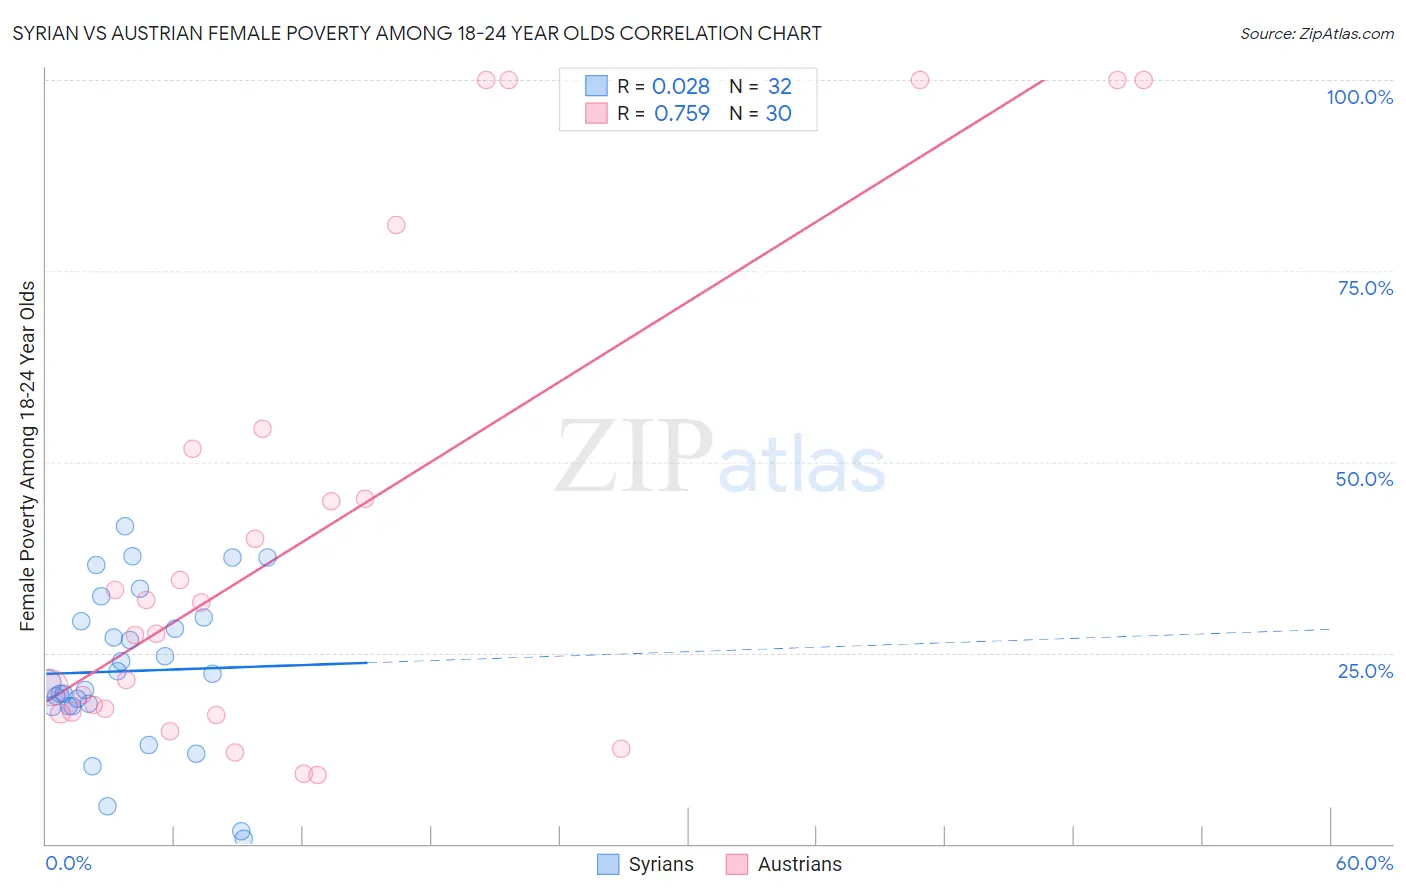 Syrian vs Austrian Female Poverty Among 18-24 Year Olds